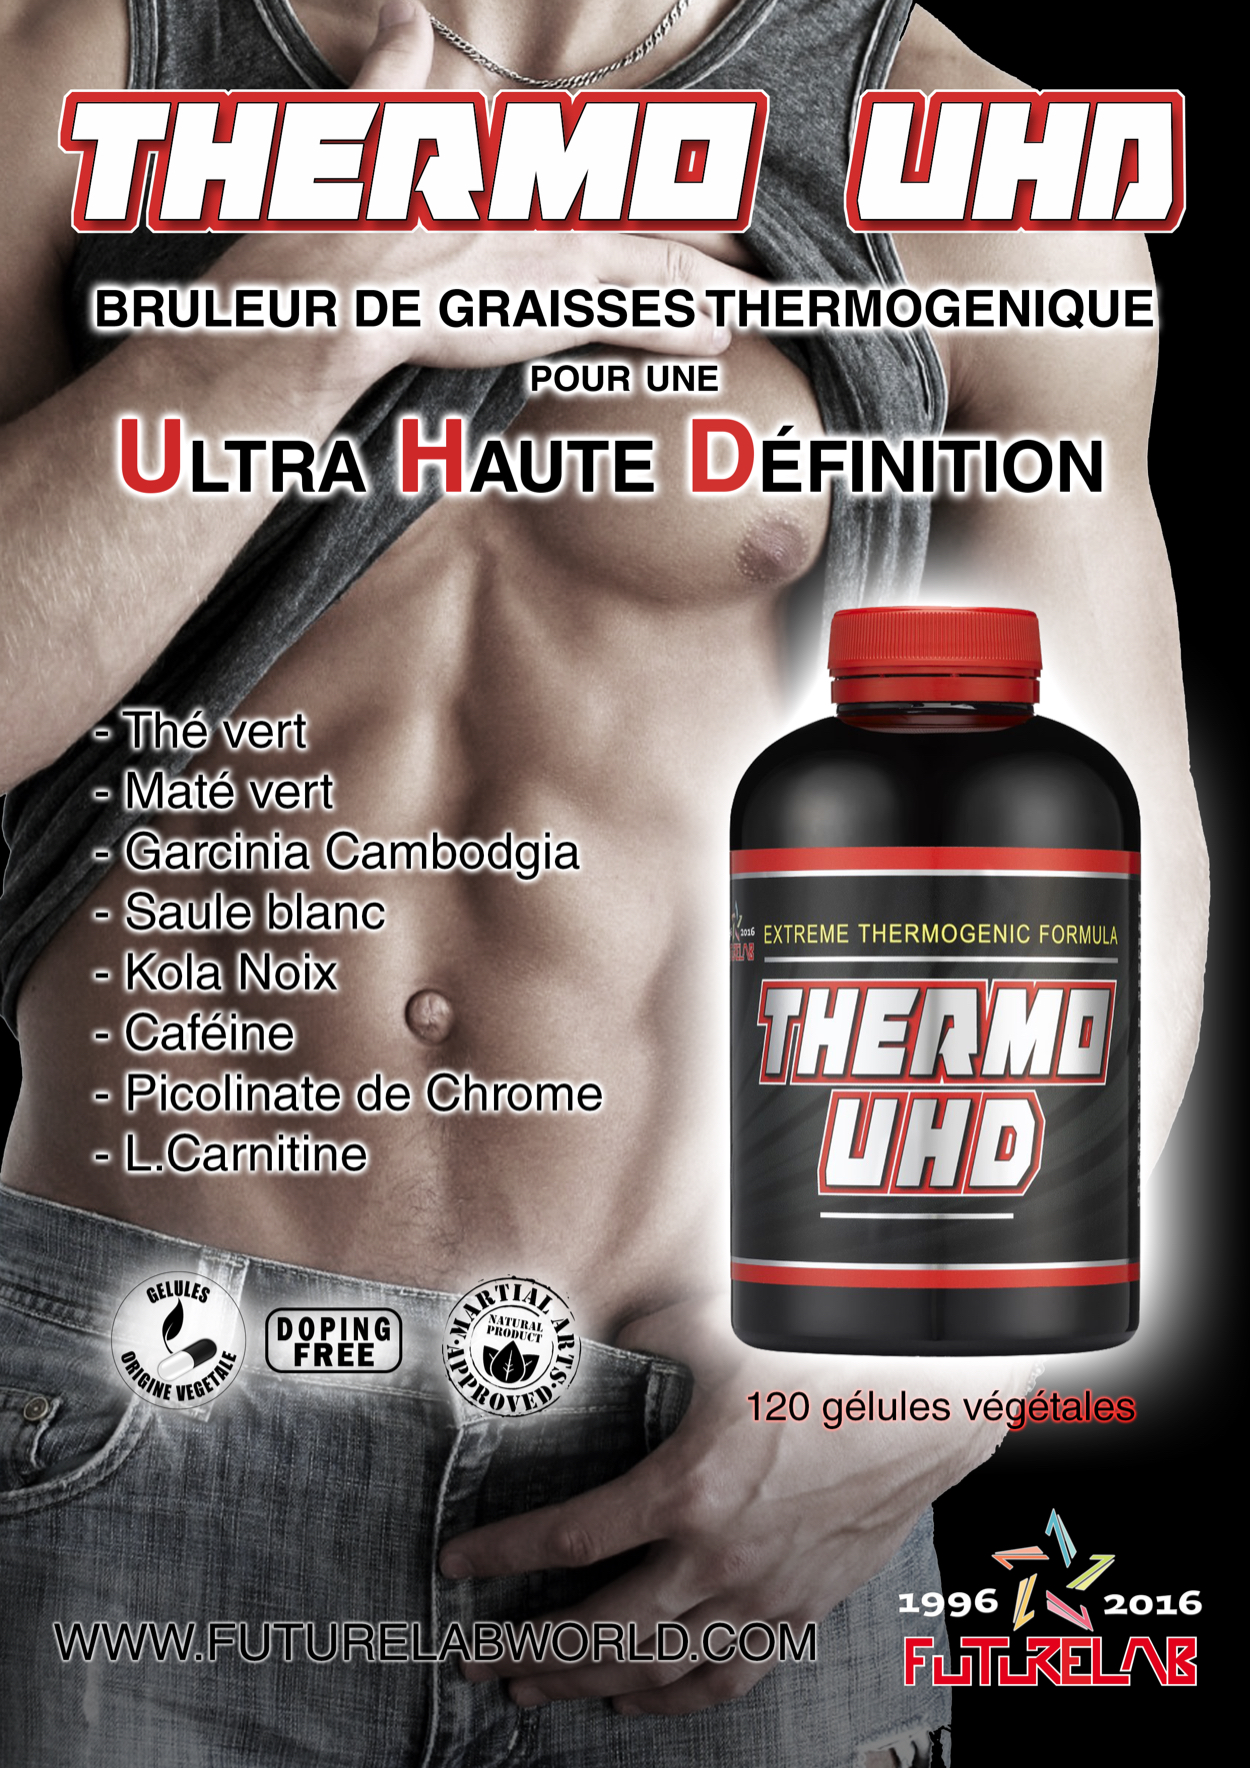 Thermo UHD